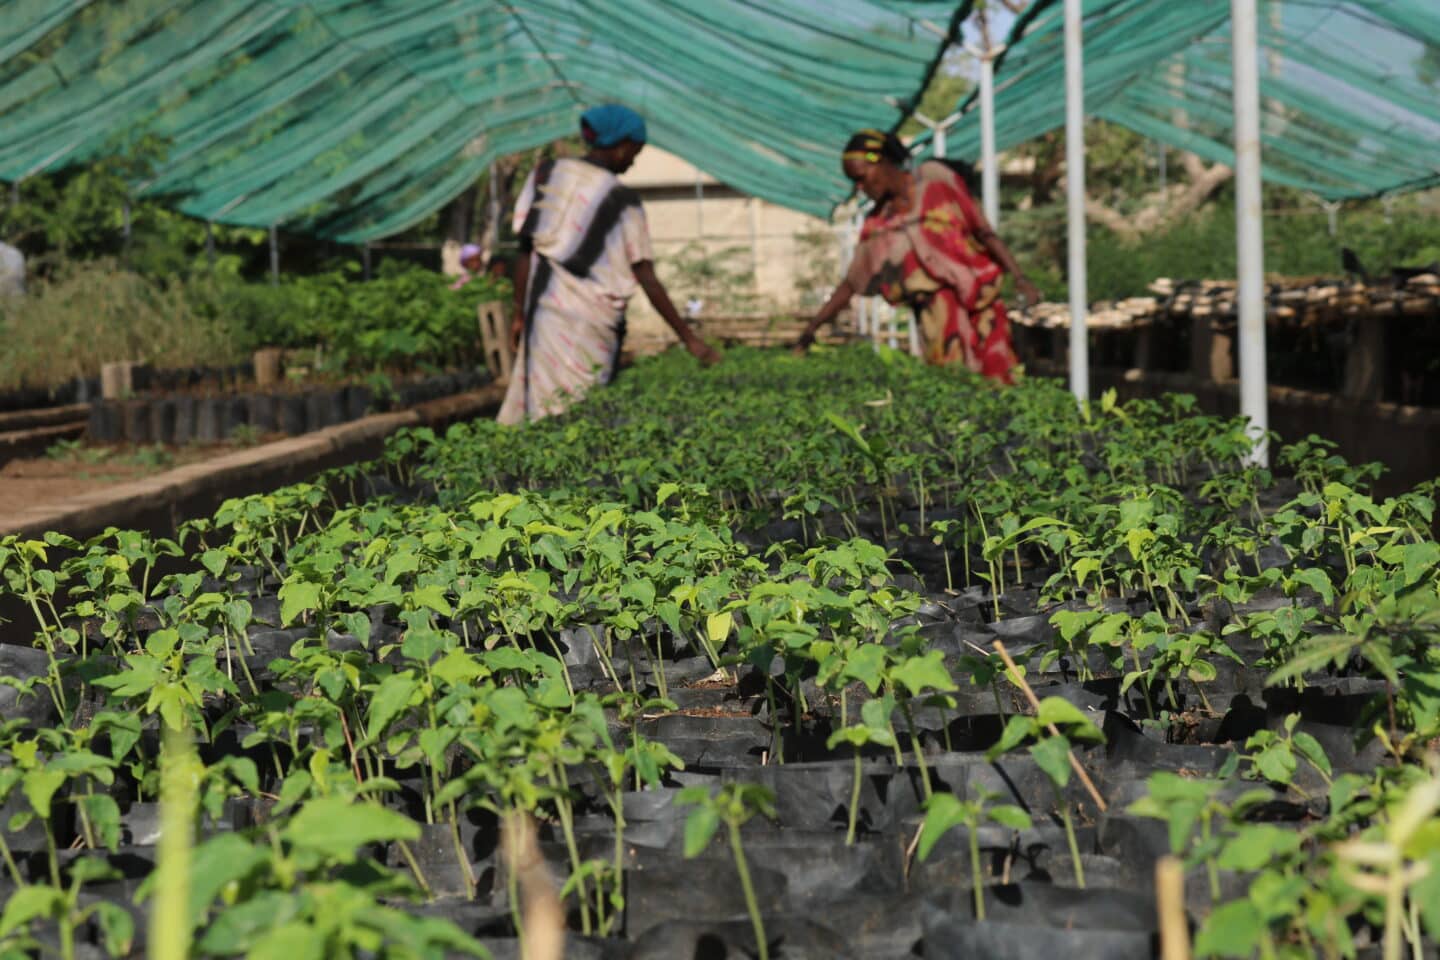 Two people tending to a large row of saplings.